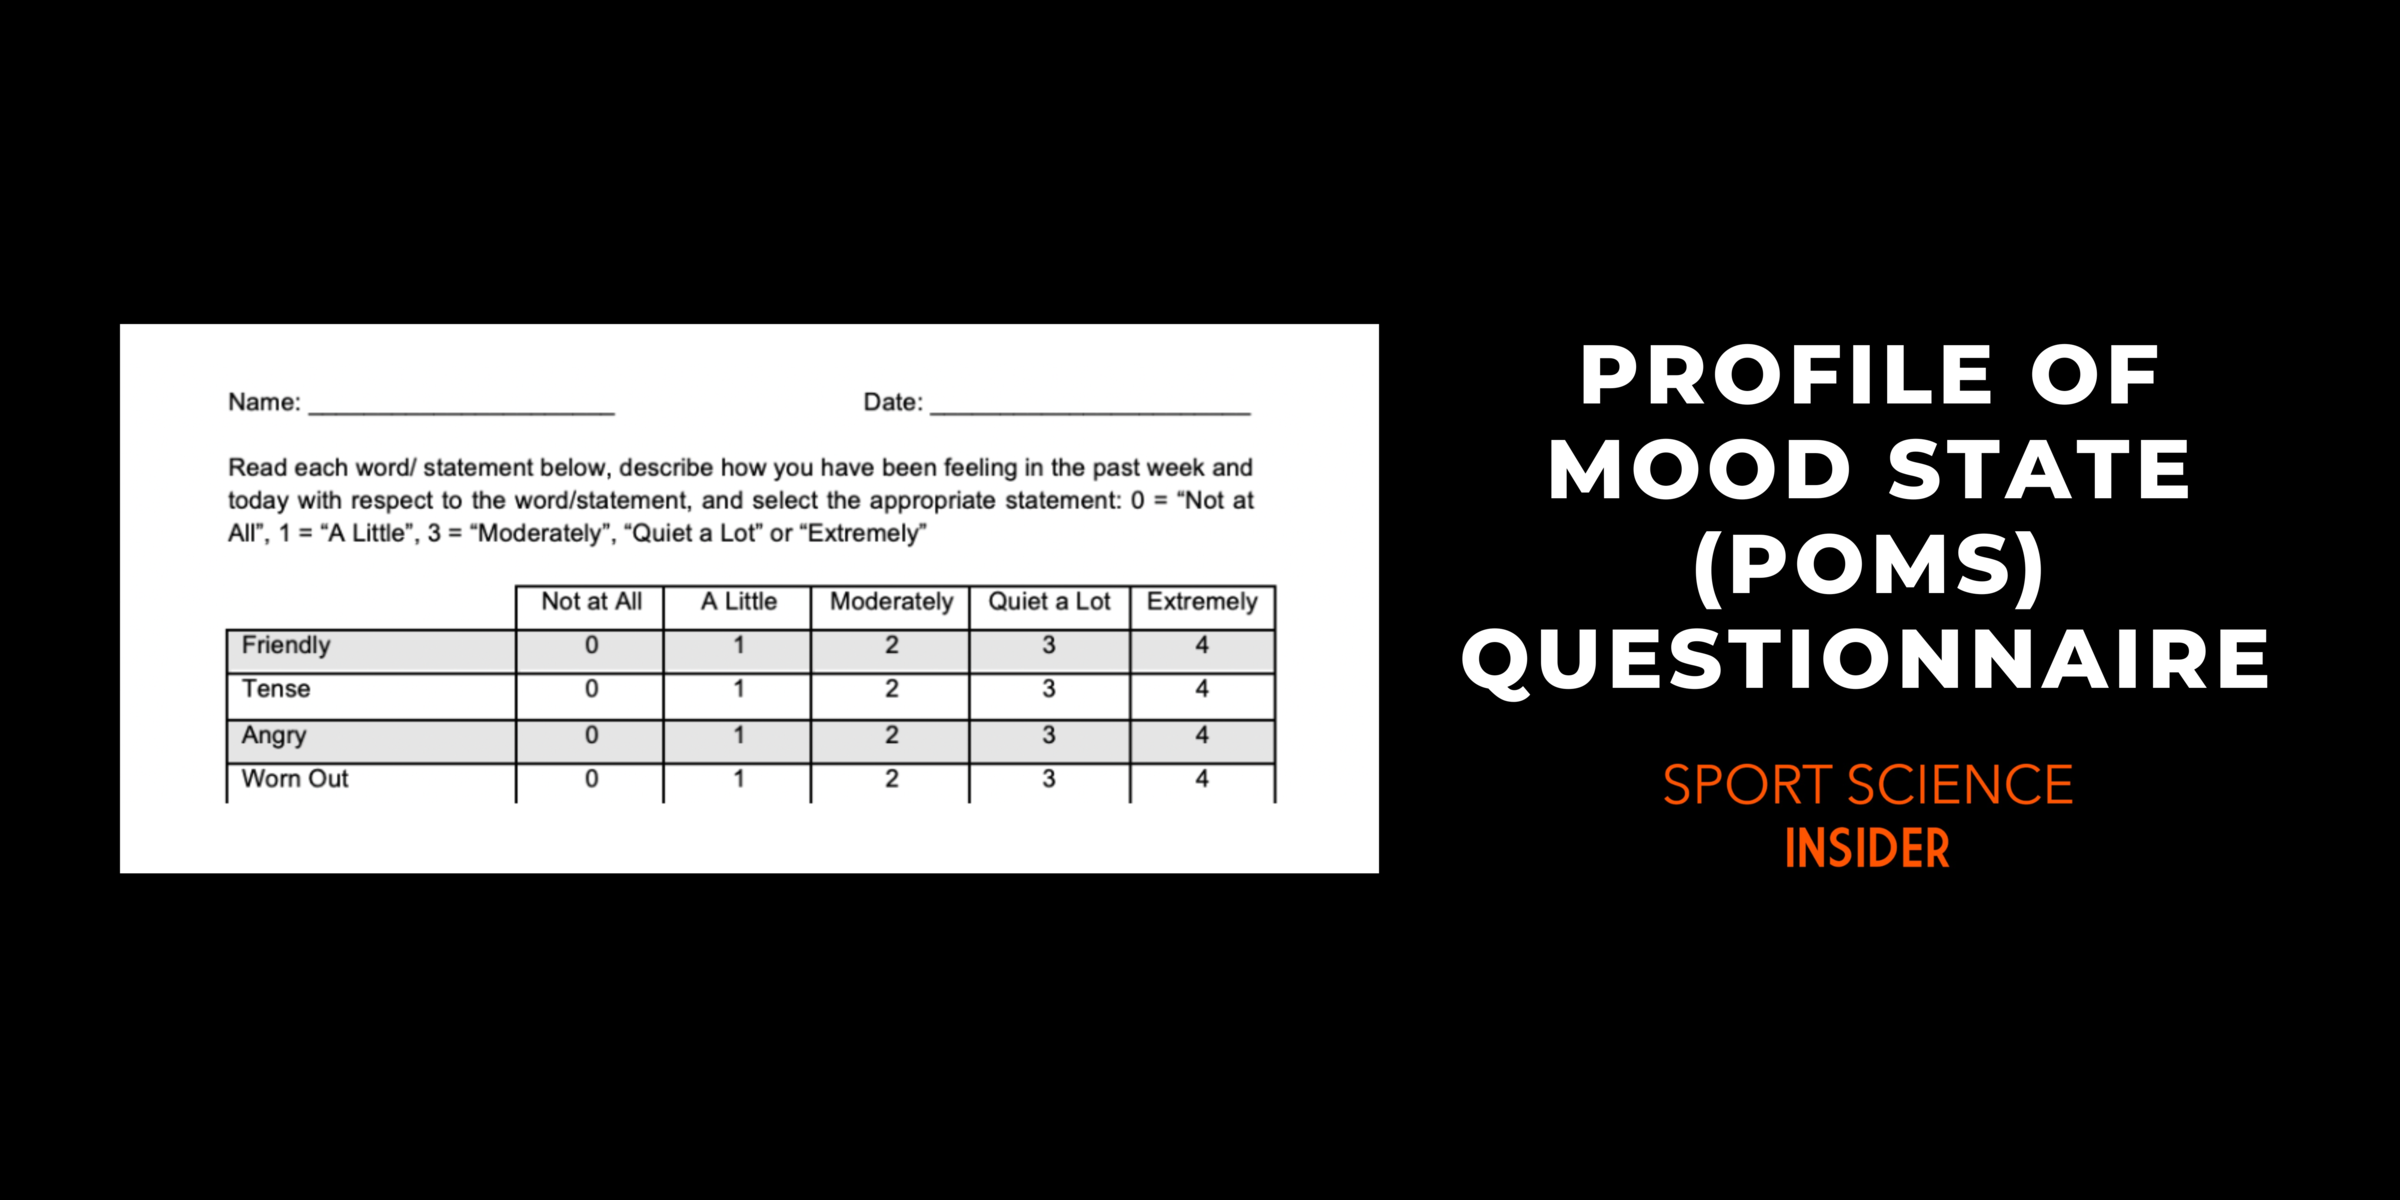 Profile of Mood State (POMS) Questionnaire